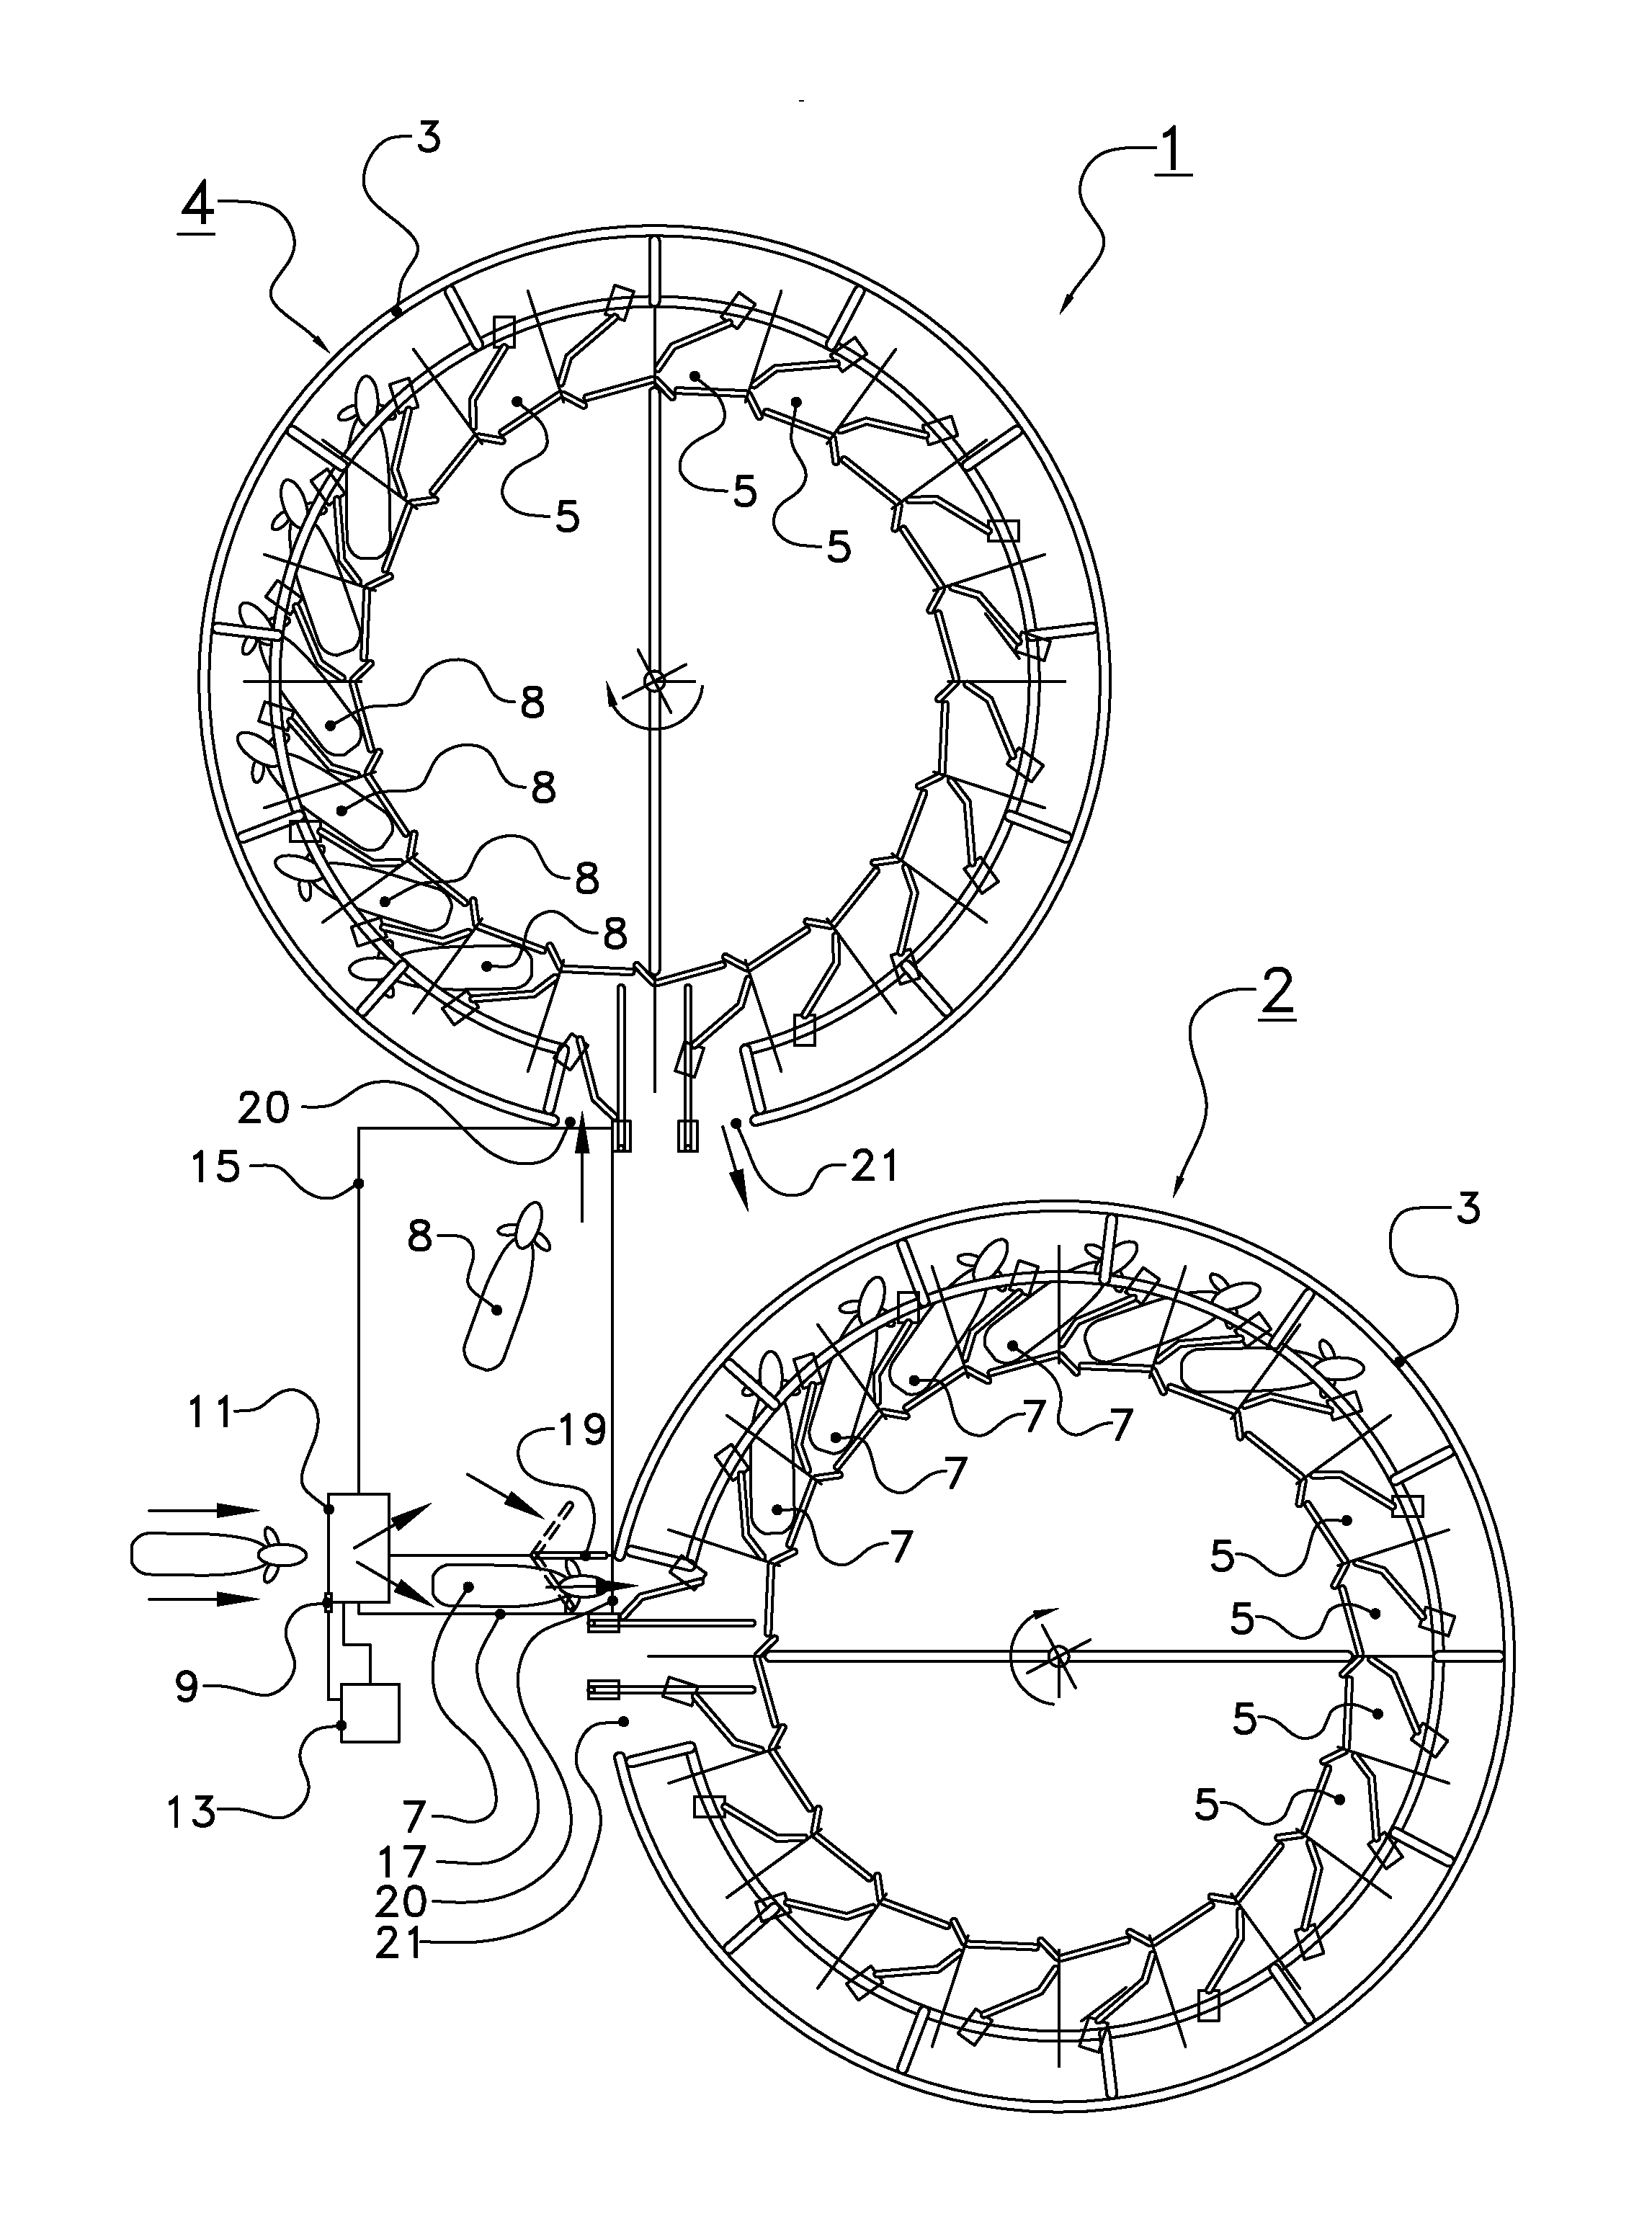 Milking system and method for milking a herd of dairy animals